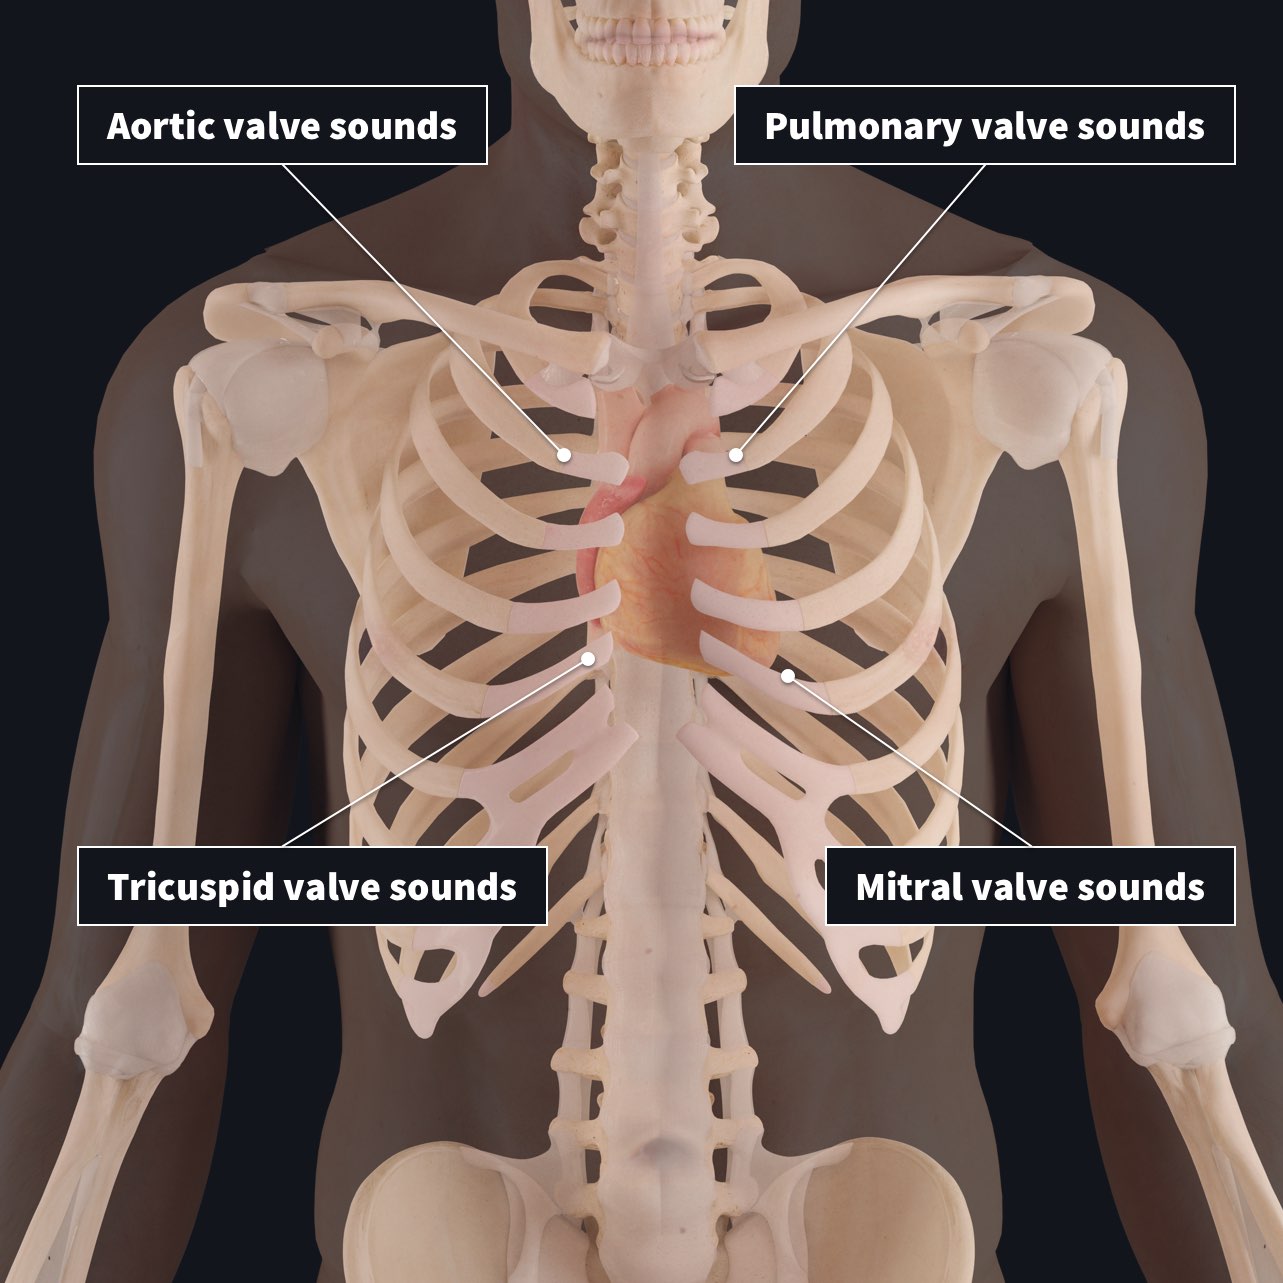 Auscultation points of the heart for listening to heart sounds